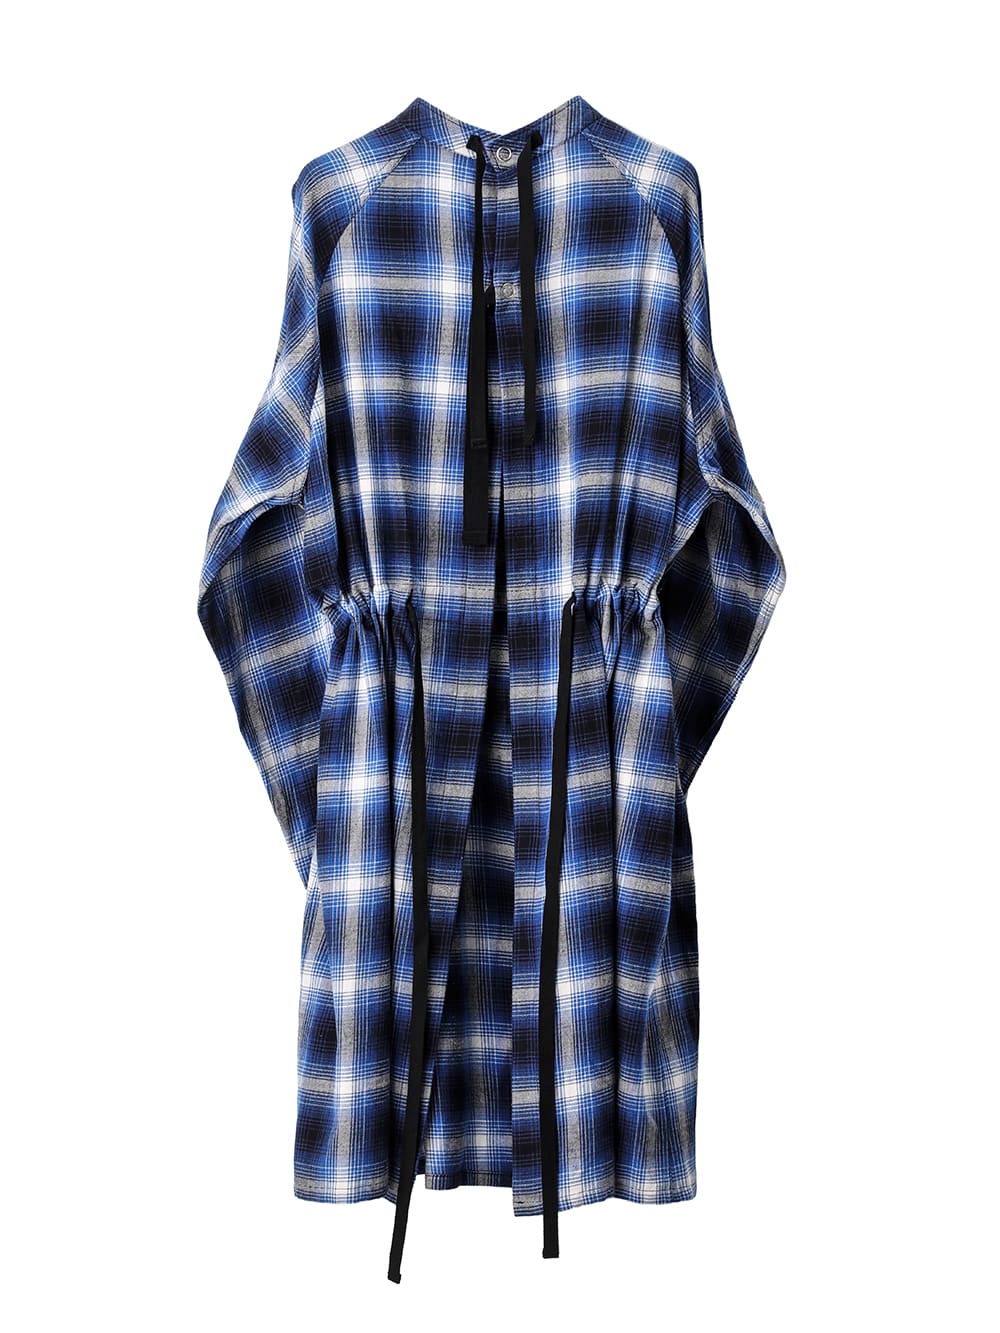 medical gown shirt.(ombre check)